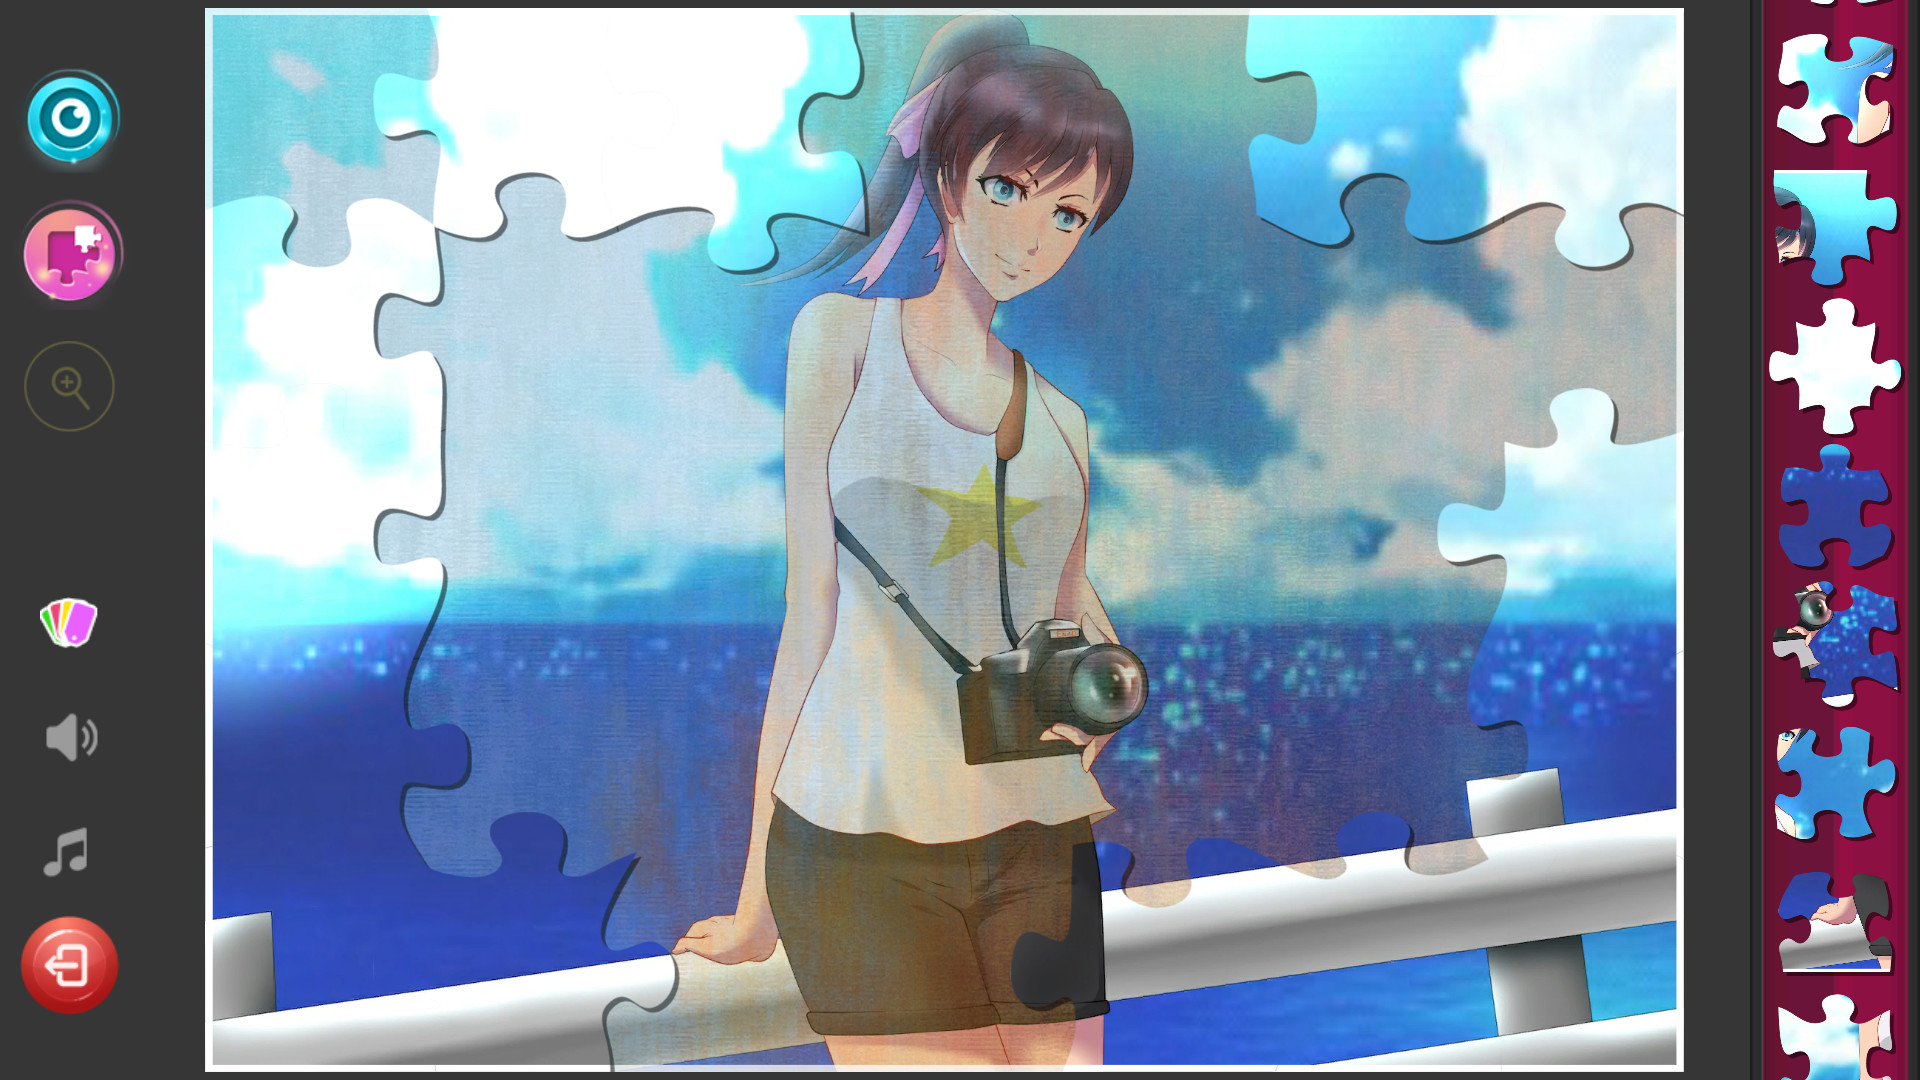 Anime Girls Jigsaw Puzzles Free Download